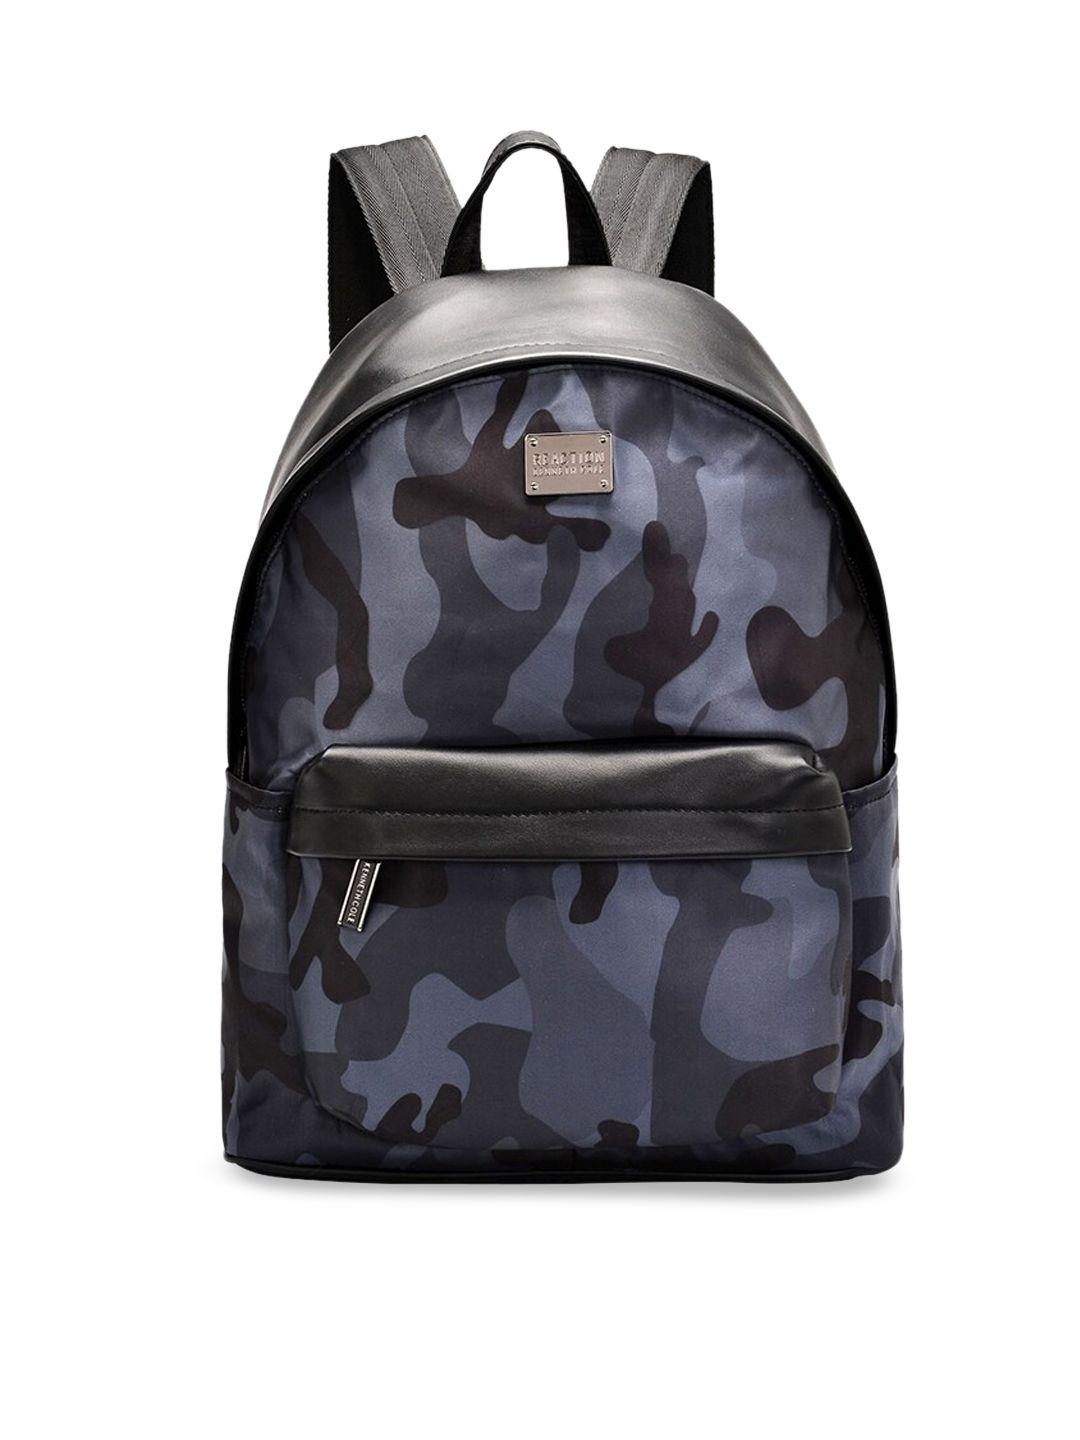 kenneth-cole-women-black-&-blue-camouflage-printed-backpack